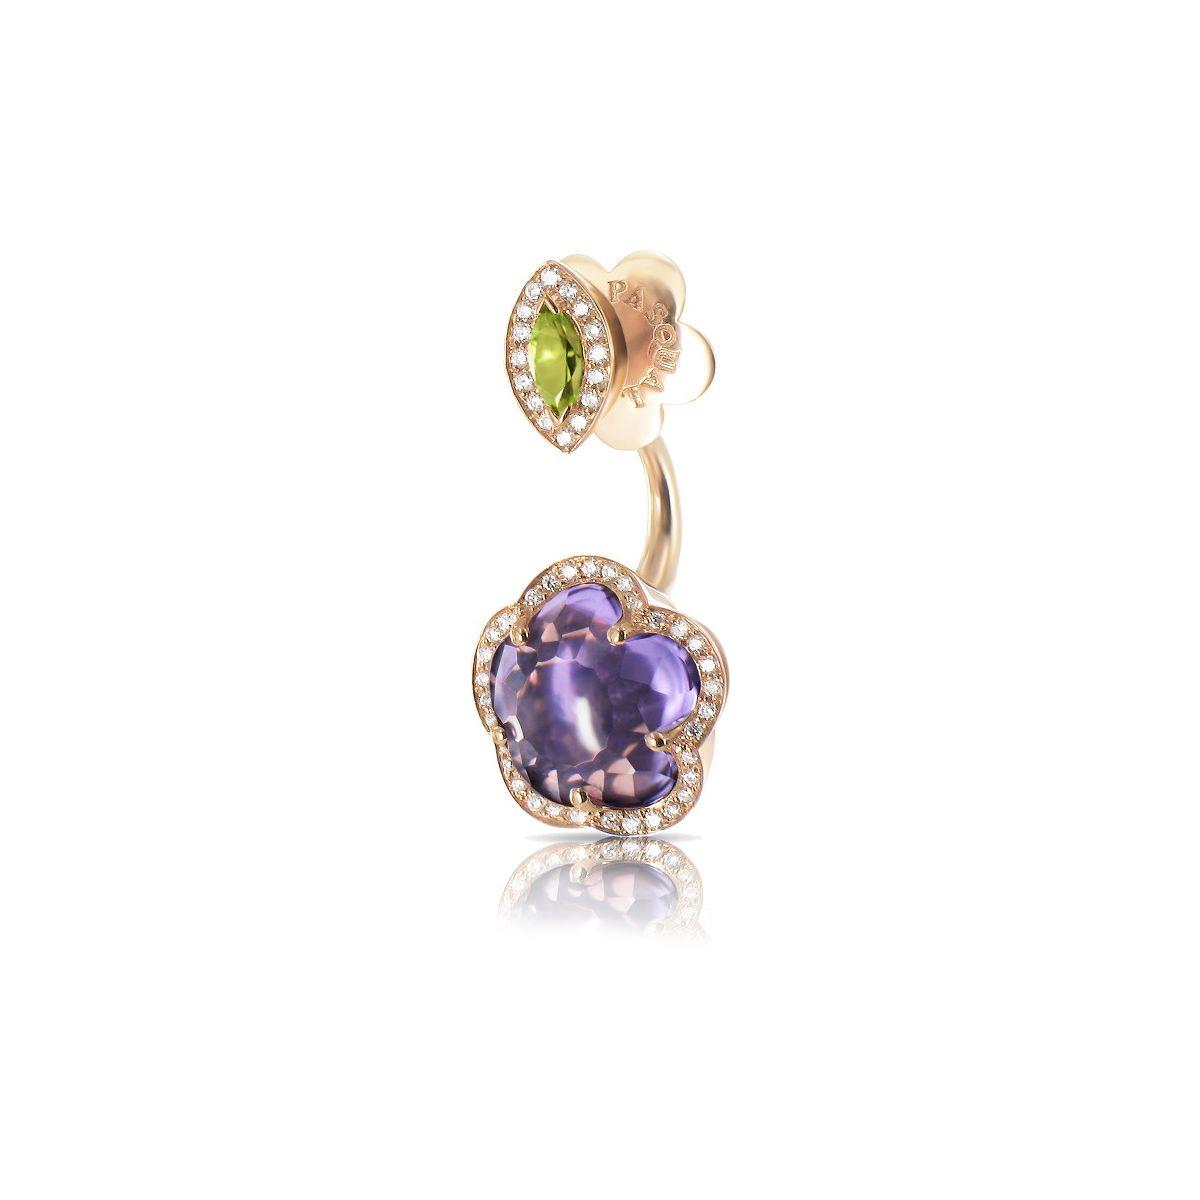 Bon Ton single earring in red gold with amethyst and diamonds - PASQUALE BRUNI